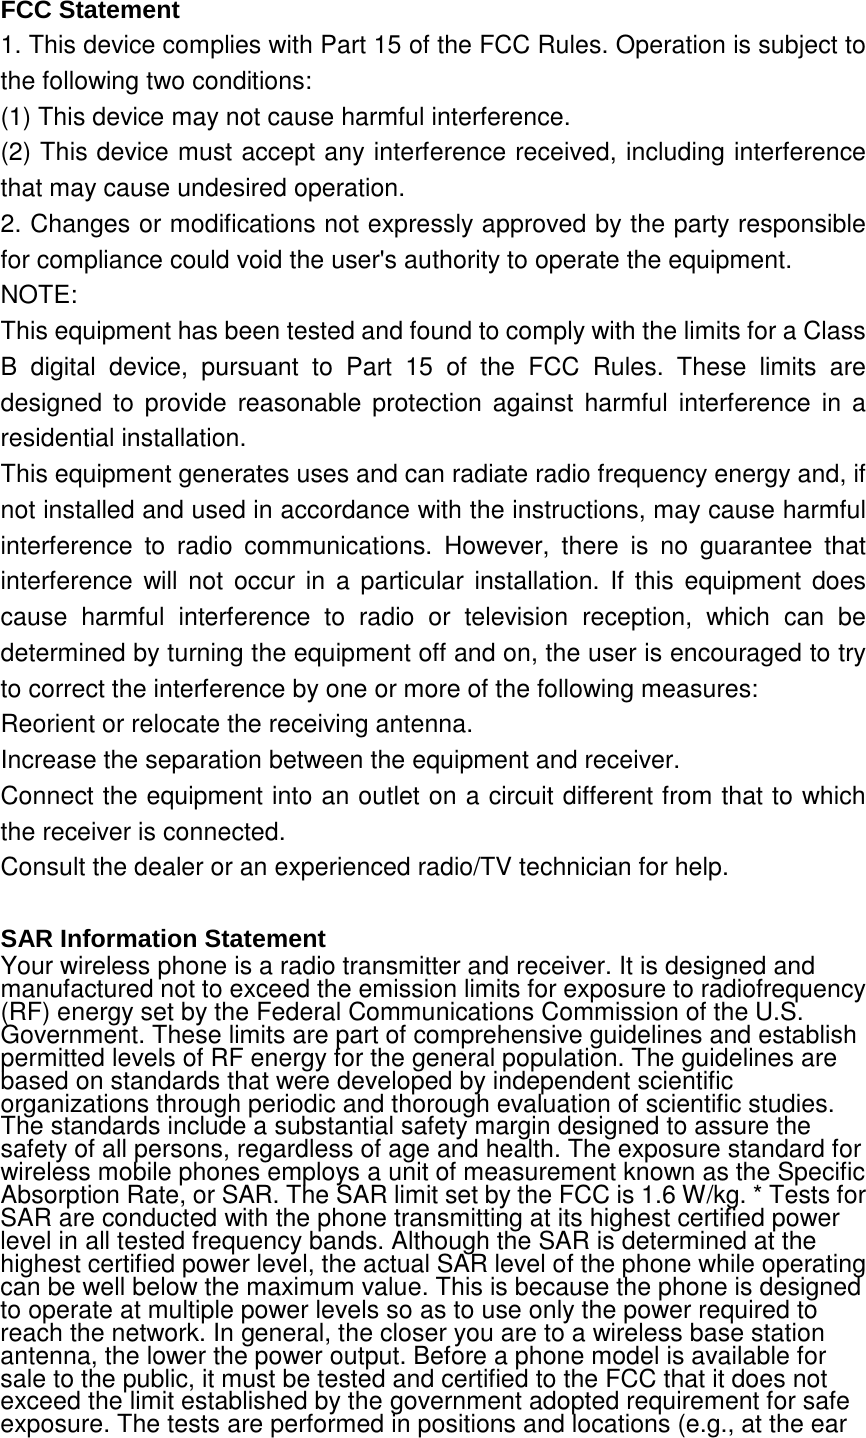 FCC Statement 1. This device complies with Part 15 of the FCC Rules. Operation is subject to the following two conditions: (1) This device may not cause harmful interference. (2) This device must accept any interference received, including interference that may cause undesired operation. 2. Changes or modifications not expressly approved by the party responsible for compliance could void the user&apos;s authority to operate the equipment. NOTE:   This equipment has been tested and found to comply with the limits for a Class B digital device, pursuant to Part 15 of the FCC Rules. These limits are designed to provide reasonable protection against harmful interference in a residential installation. This equipment generates uses and can radiate radio frequency energy and, if not installed and used in accordance with the instructions, may cause harmful interference to radio communications. However, there is no guarantee that interference will not occur in a particular installation. If this equipment does cause harmful interference to radio or television reception, which can be determined by turning the equipment off and on, the user is encouraged to try to correct the interference by one or more of the following measures: Reorient or relocate the receiving antenna. Increase the separation between the equipment and receiver. Connect the equipment into an outlet on a circuit different from that to which the receiver is connected.   Consult the dealer or an experienced radio/TV technician for help.  SAR Information Statement Your wireless phone is a radio transmitter and receiver. It is designed and manufactured not to exceed the emission limits for exposure to radiofrequency (RF) energy set by the Federal Communications Commission of the U.S. Government. These limits are part of comprehensive guidelines and establish permitted levels of RF energy for the general population. The guidelines are based on standards that were developed by independent scientific organizations through periodic and thorough evaluation of scientific studies. The standards include a substantial safety margin designed to assure the safety of all persons, regardless of age and health. The exposure standard for wireless mobile phones employs a unit of measurement known as the Specific Absorption Rate, or SAR. The SAR limit set by the FCC is 1.6 W/kg. * Tests for SAR are conducted with the phone transmitting at its highest certified power level in all tested frequency bands. Although the SAR is determined at the highest certified power level, the actual SAR level of the phone while operating can be well below the maximum value. This is because the phone is designed to operate at multiple power levels so as to use only the power required to reach the network. In general, the closer you are to a wireless base station antenna, the lower the power output. Before a phone model is available for sale to the public, it must be tested and certified to the FCC that it does not exceed the limit established by the government adopted requirement for safe exposure. The tests are performed in positions and locations (e.g., at the ear 